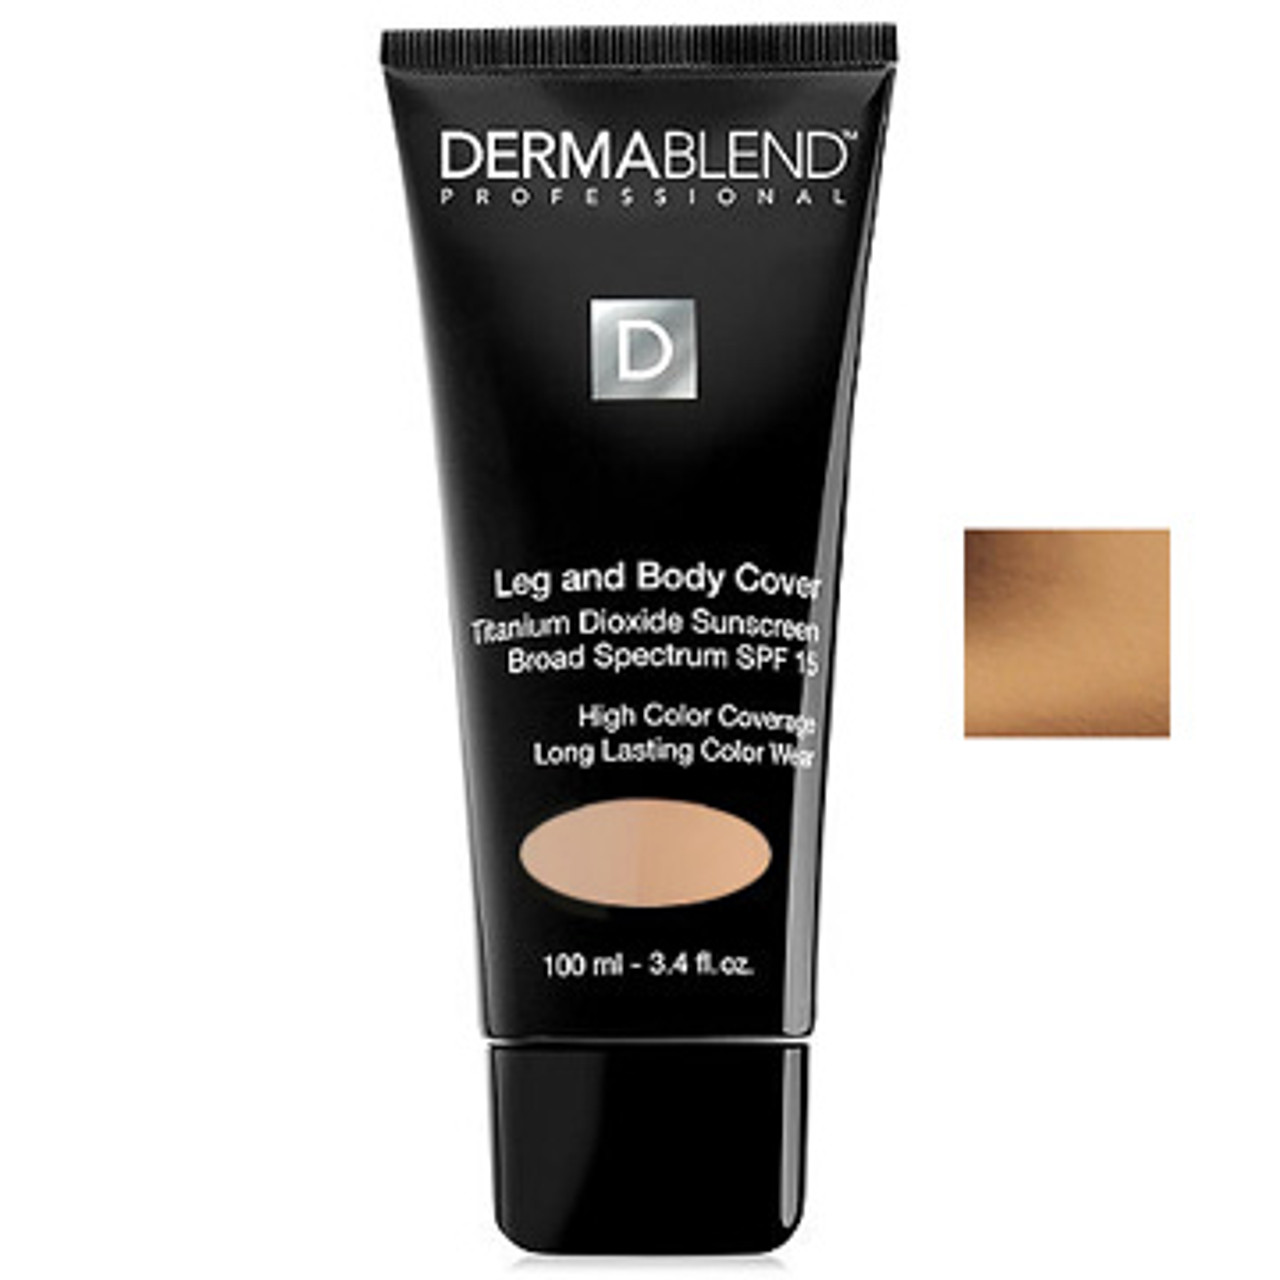 Dermablend Leg and Body Cover SPF 15 - 3.4 oz - Bronze (800730) ® on Sale  at $24 - Free Samples & Reward Points